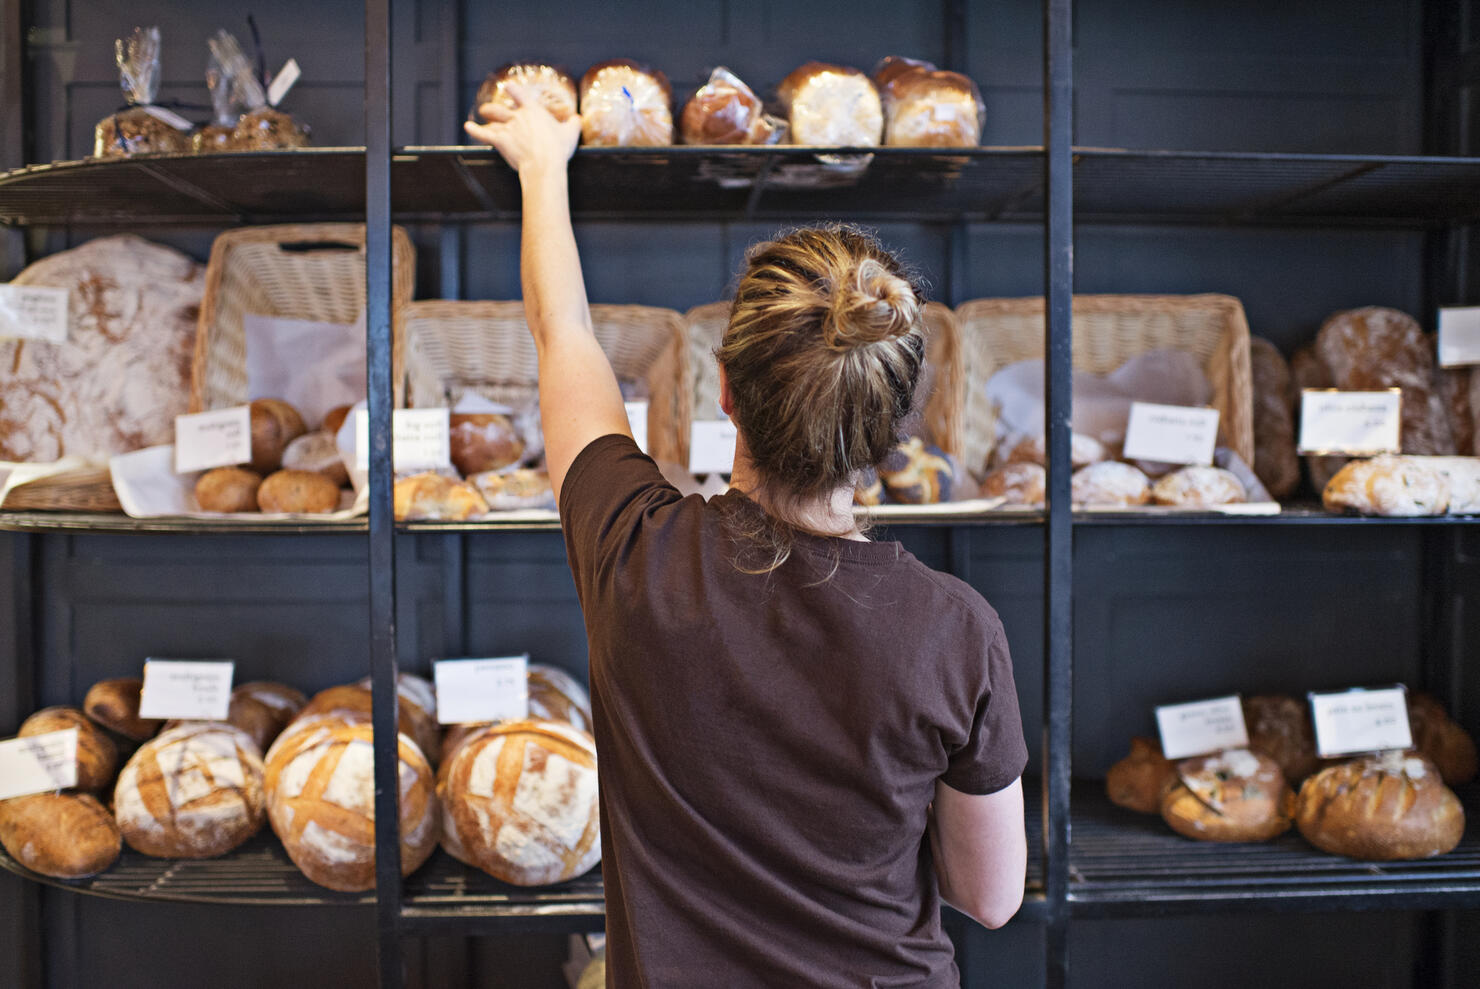 Waitress selecting loaf of bread